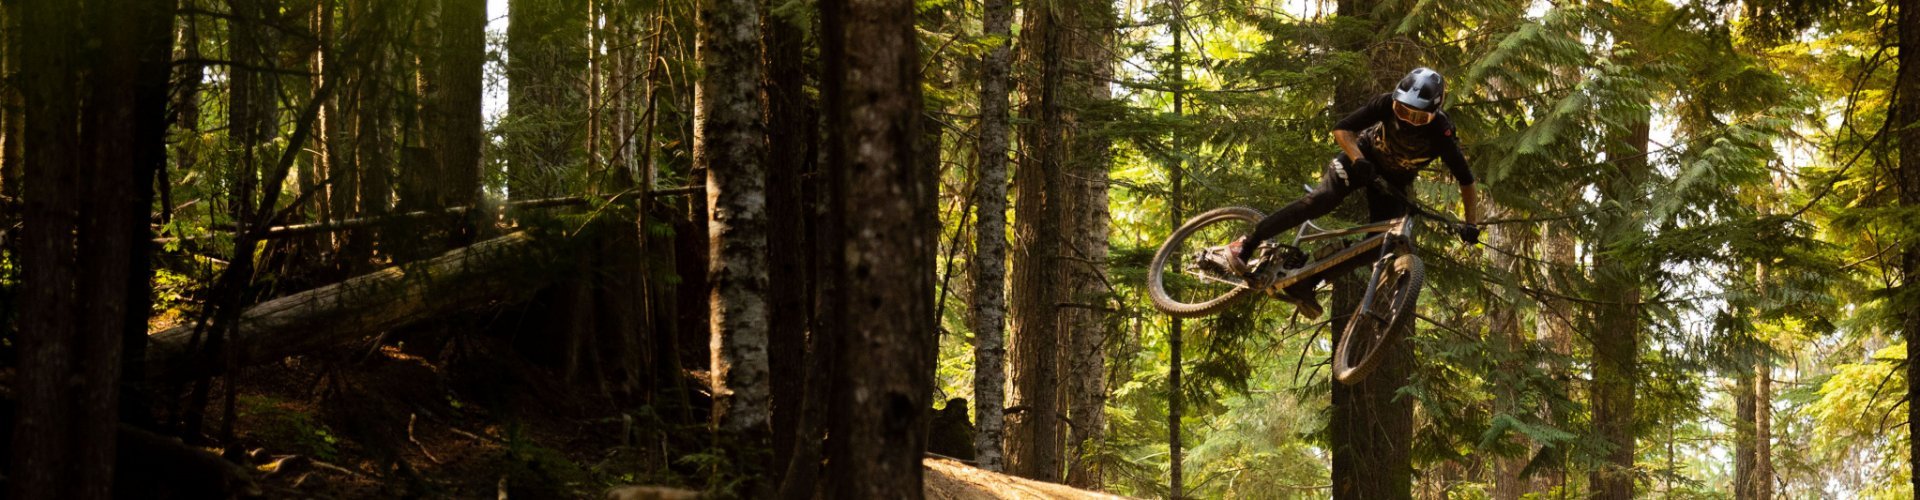 Christoph from the bc Team whips his bike during a jump with his MTB. He’s riding in the forest.